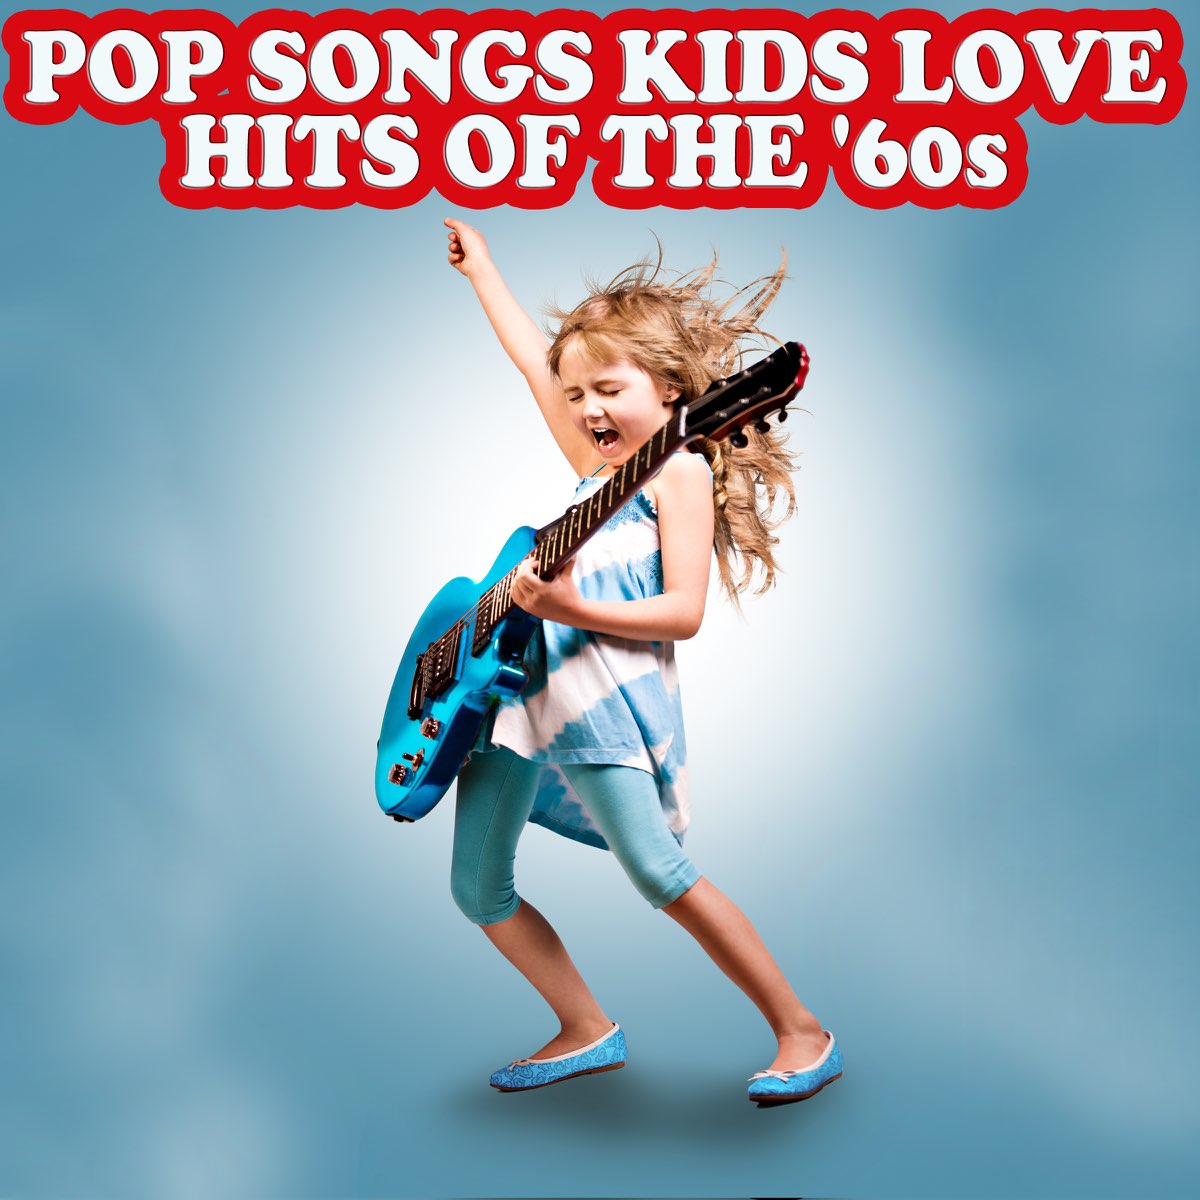 Pop Songs Kids Love Hits of the '60s by Various Artists on Apple Music